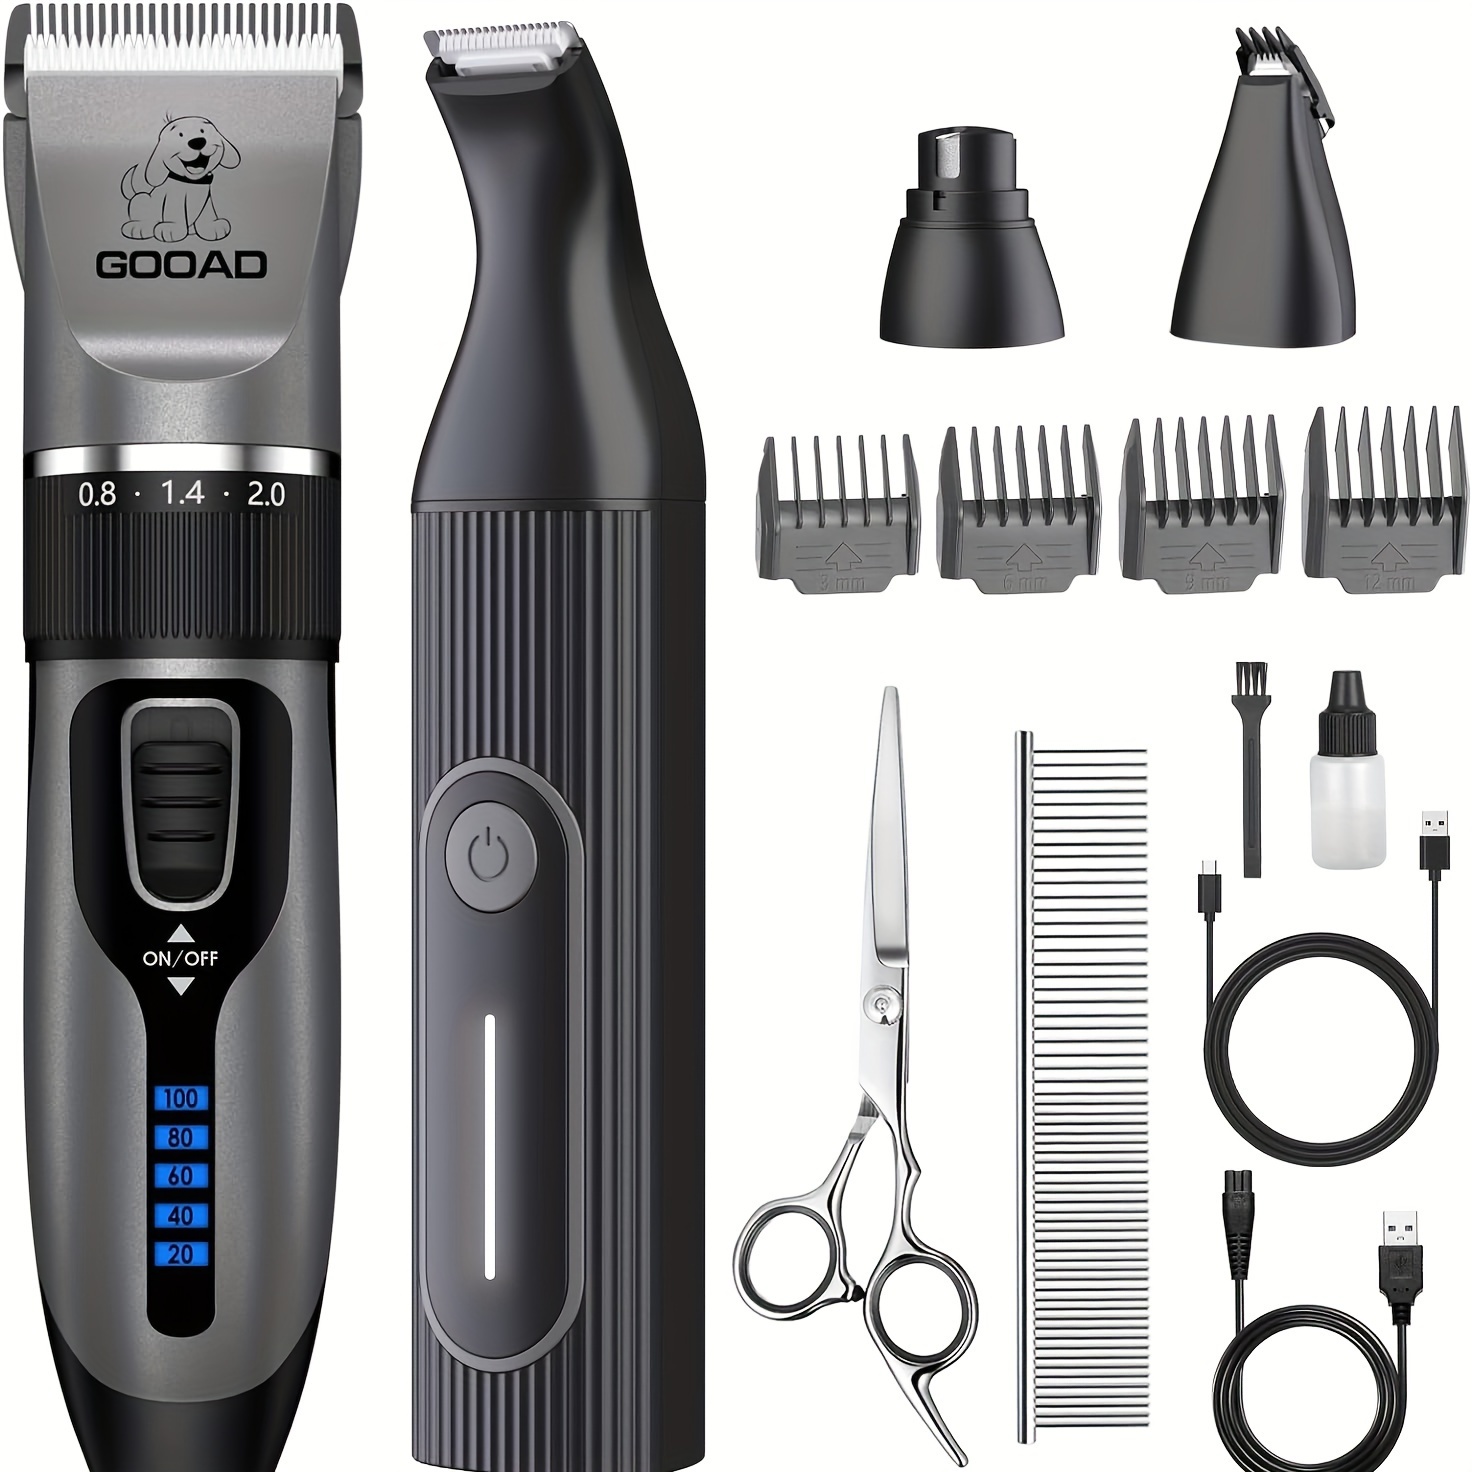 

Gooad Dog Grooming Kit Clippers - 4 In 1 Low Noise - Rechargeable Cordless Silent Claw Trimmer Nail Grinder, Clippers For Trimming Thick And Thin Hair, Pet Shaver For Small And Large Dogs And Cats.